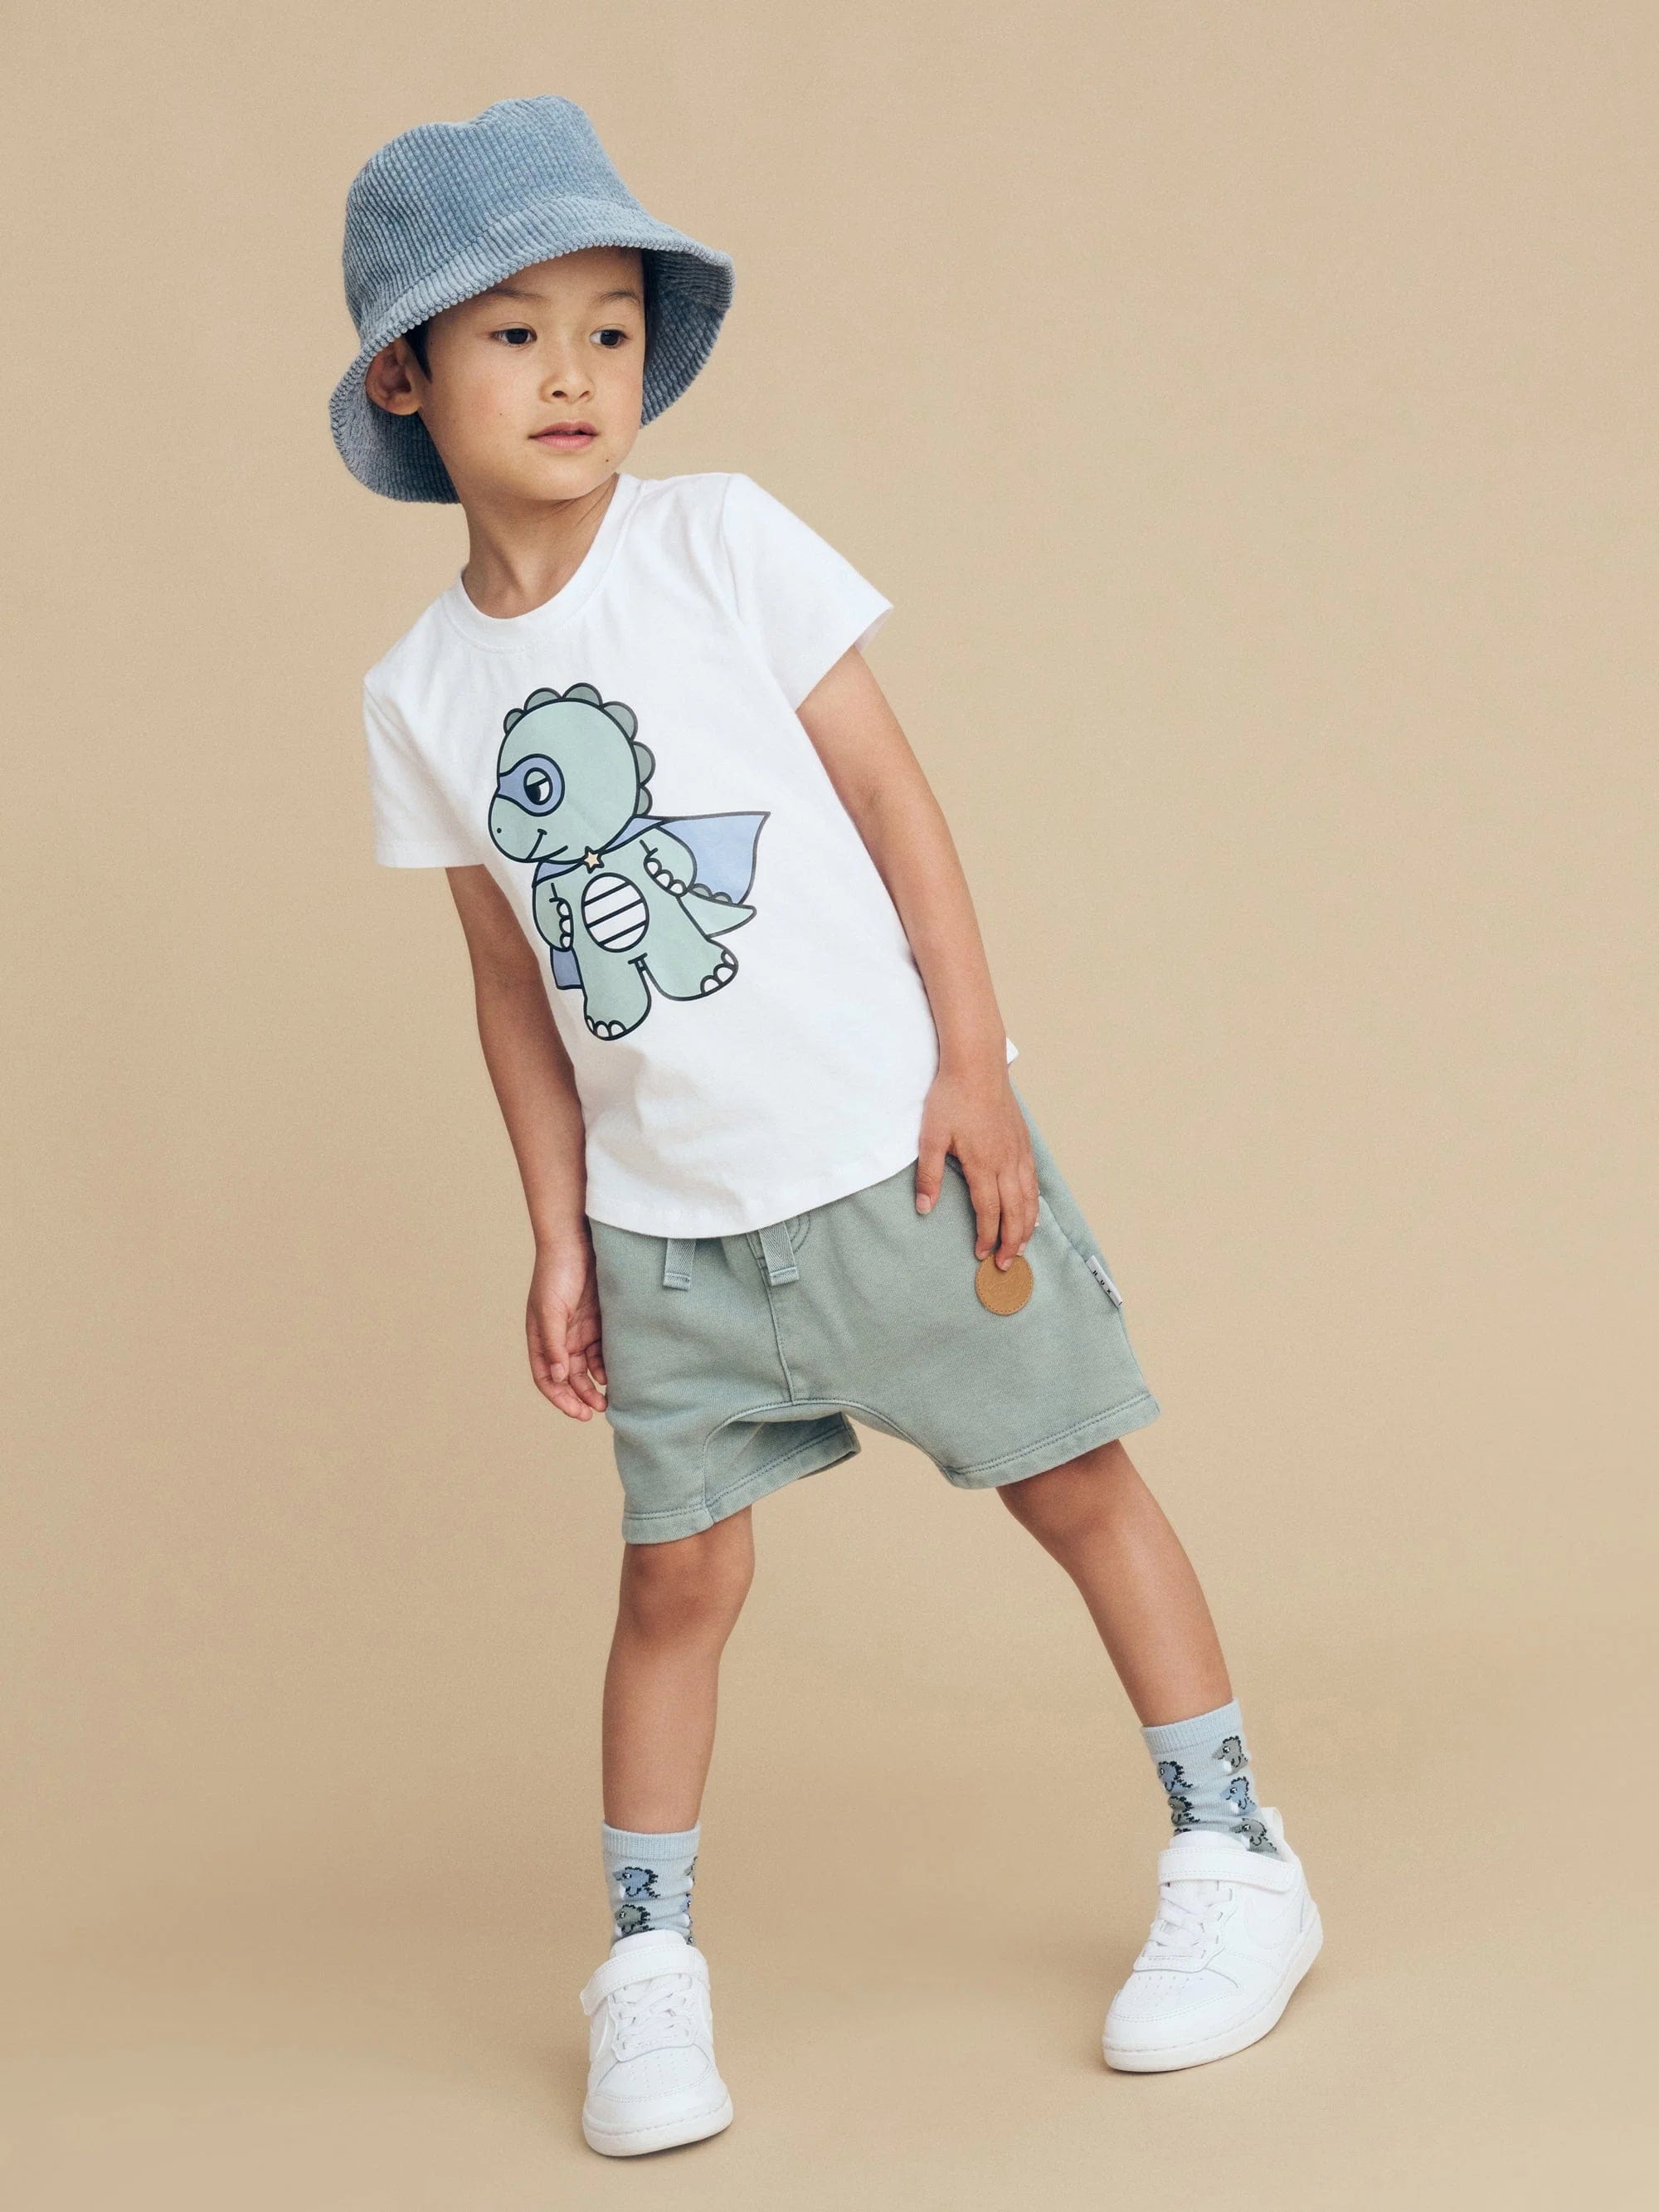 Huxbaby - Organic Baby Clothes & Sustainable Kids Clothing